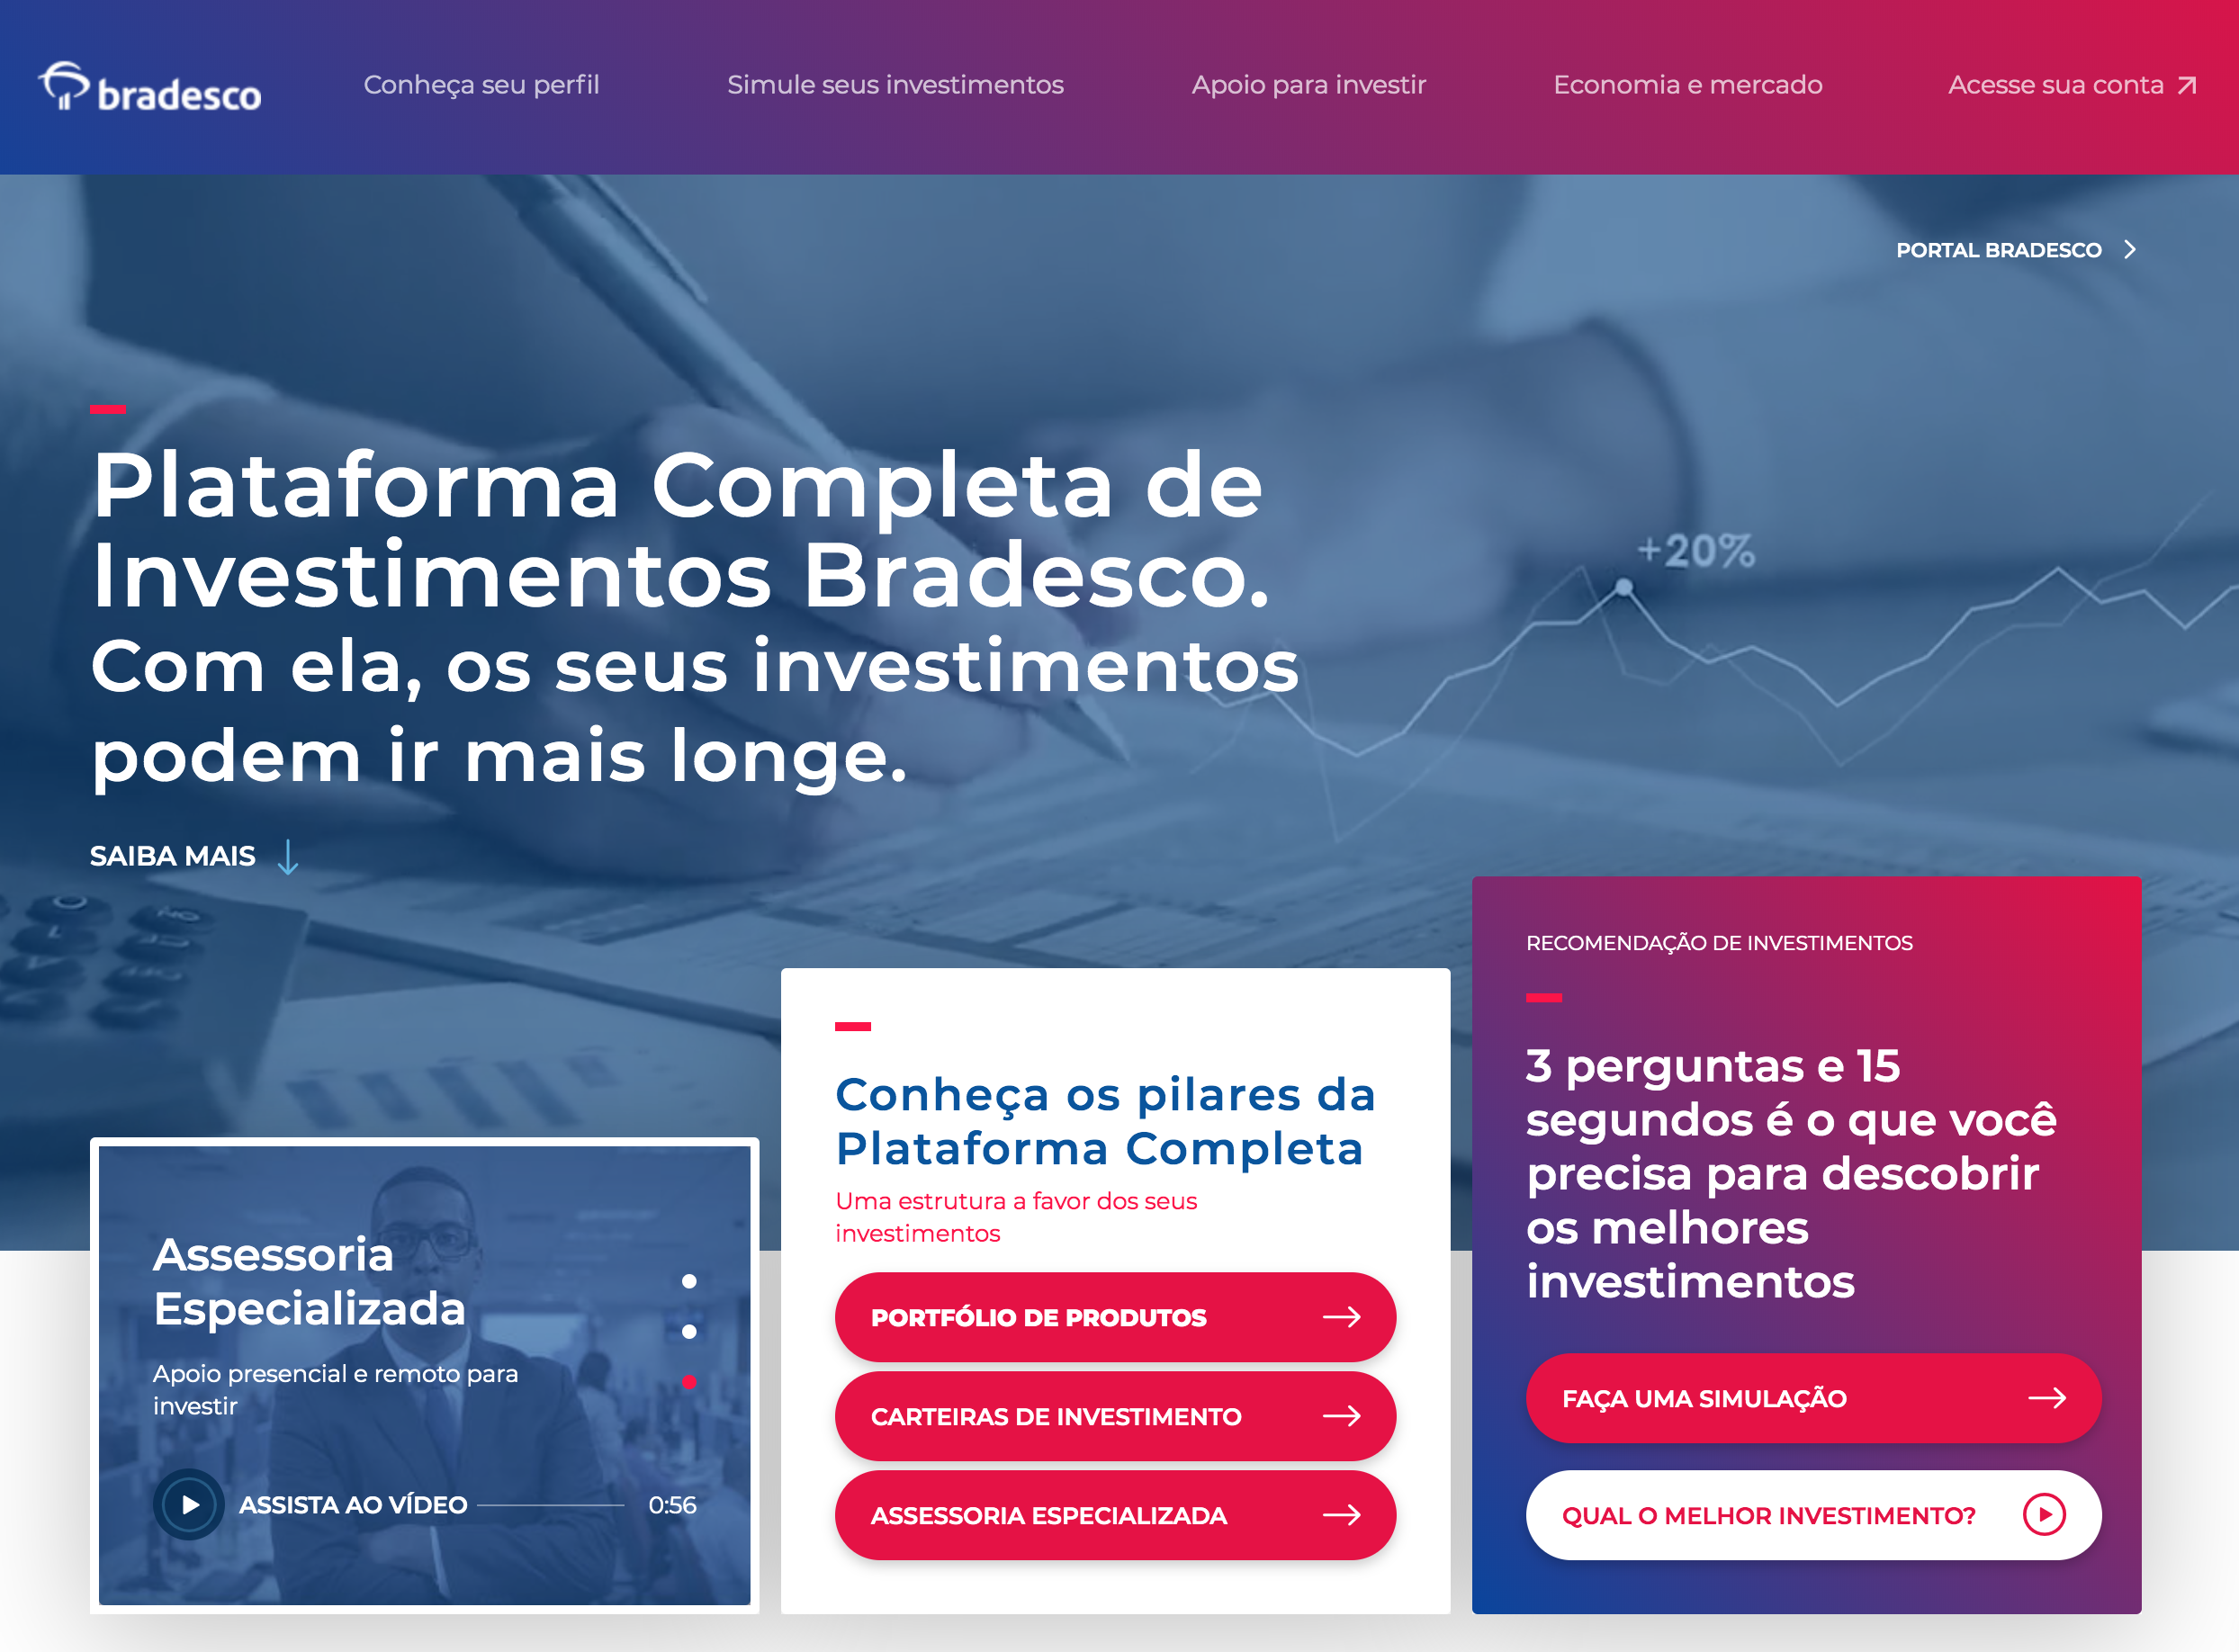 A brand new portal for the Brazilian bank’s investment activities